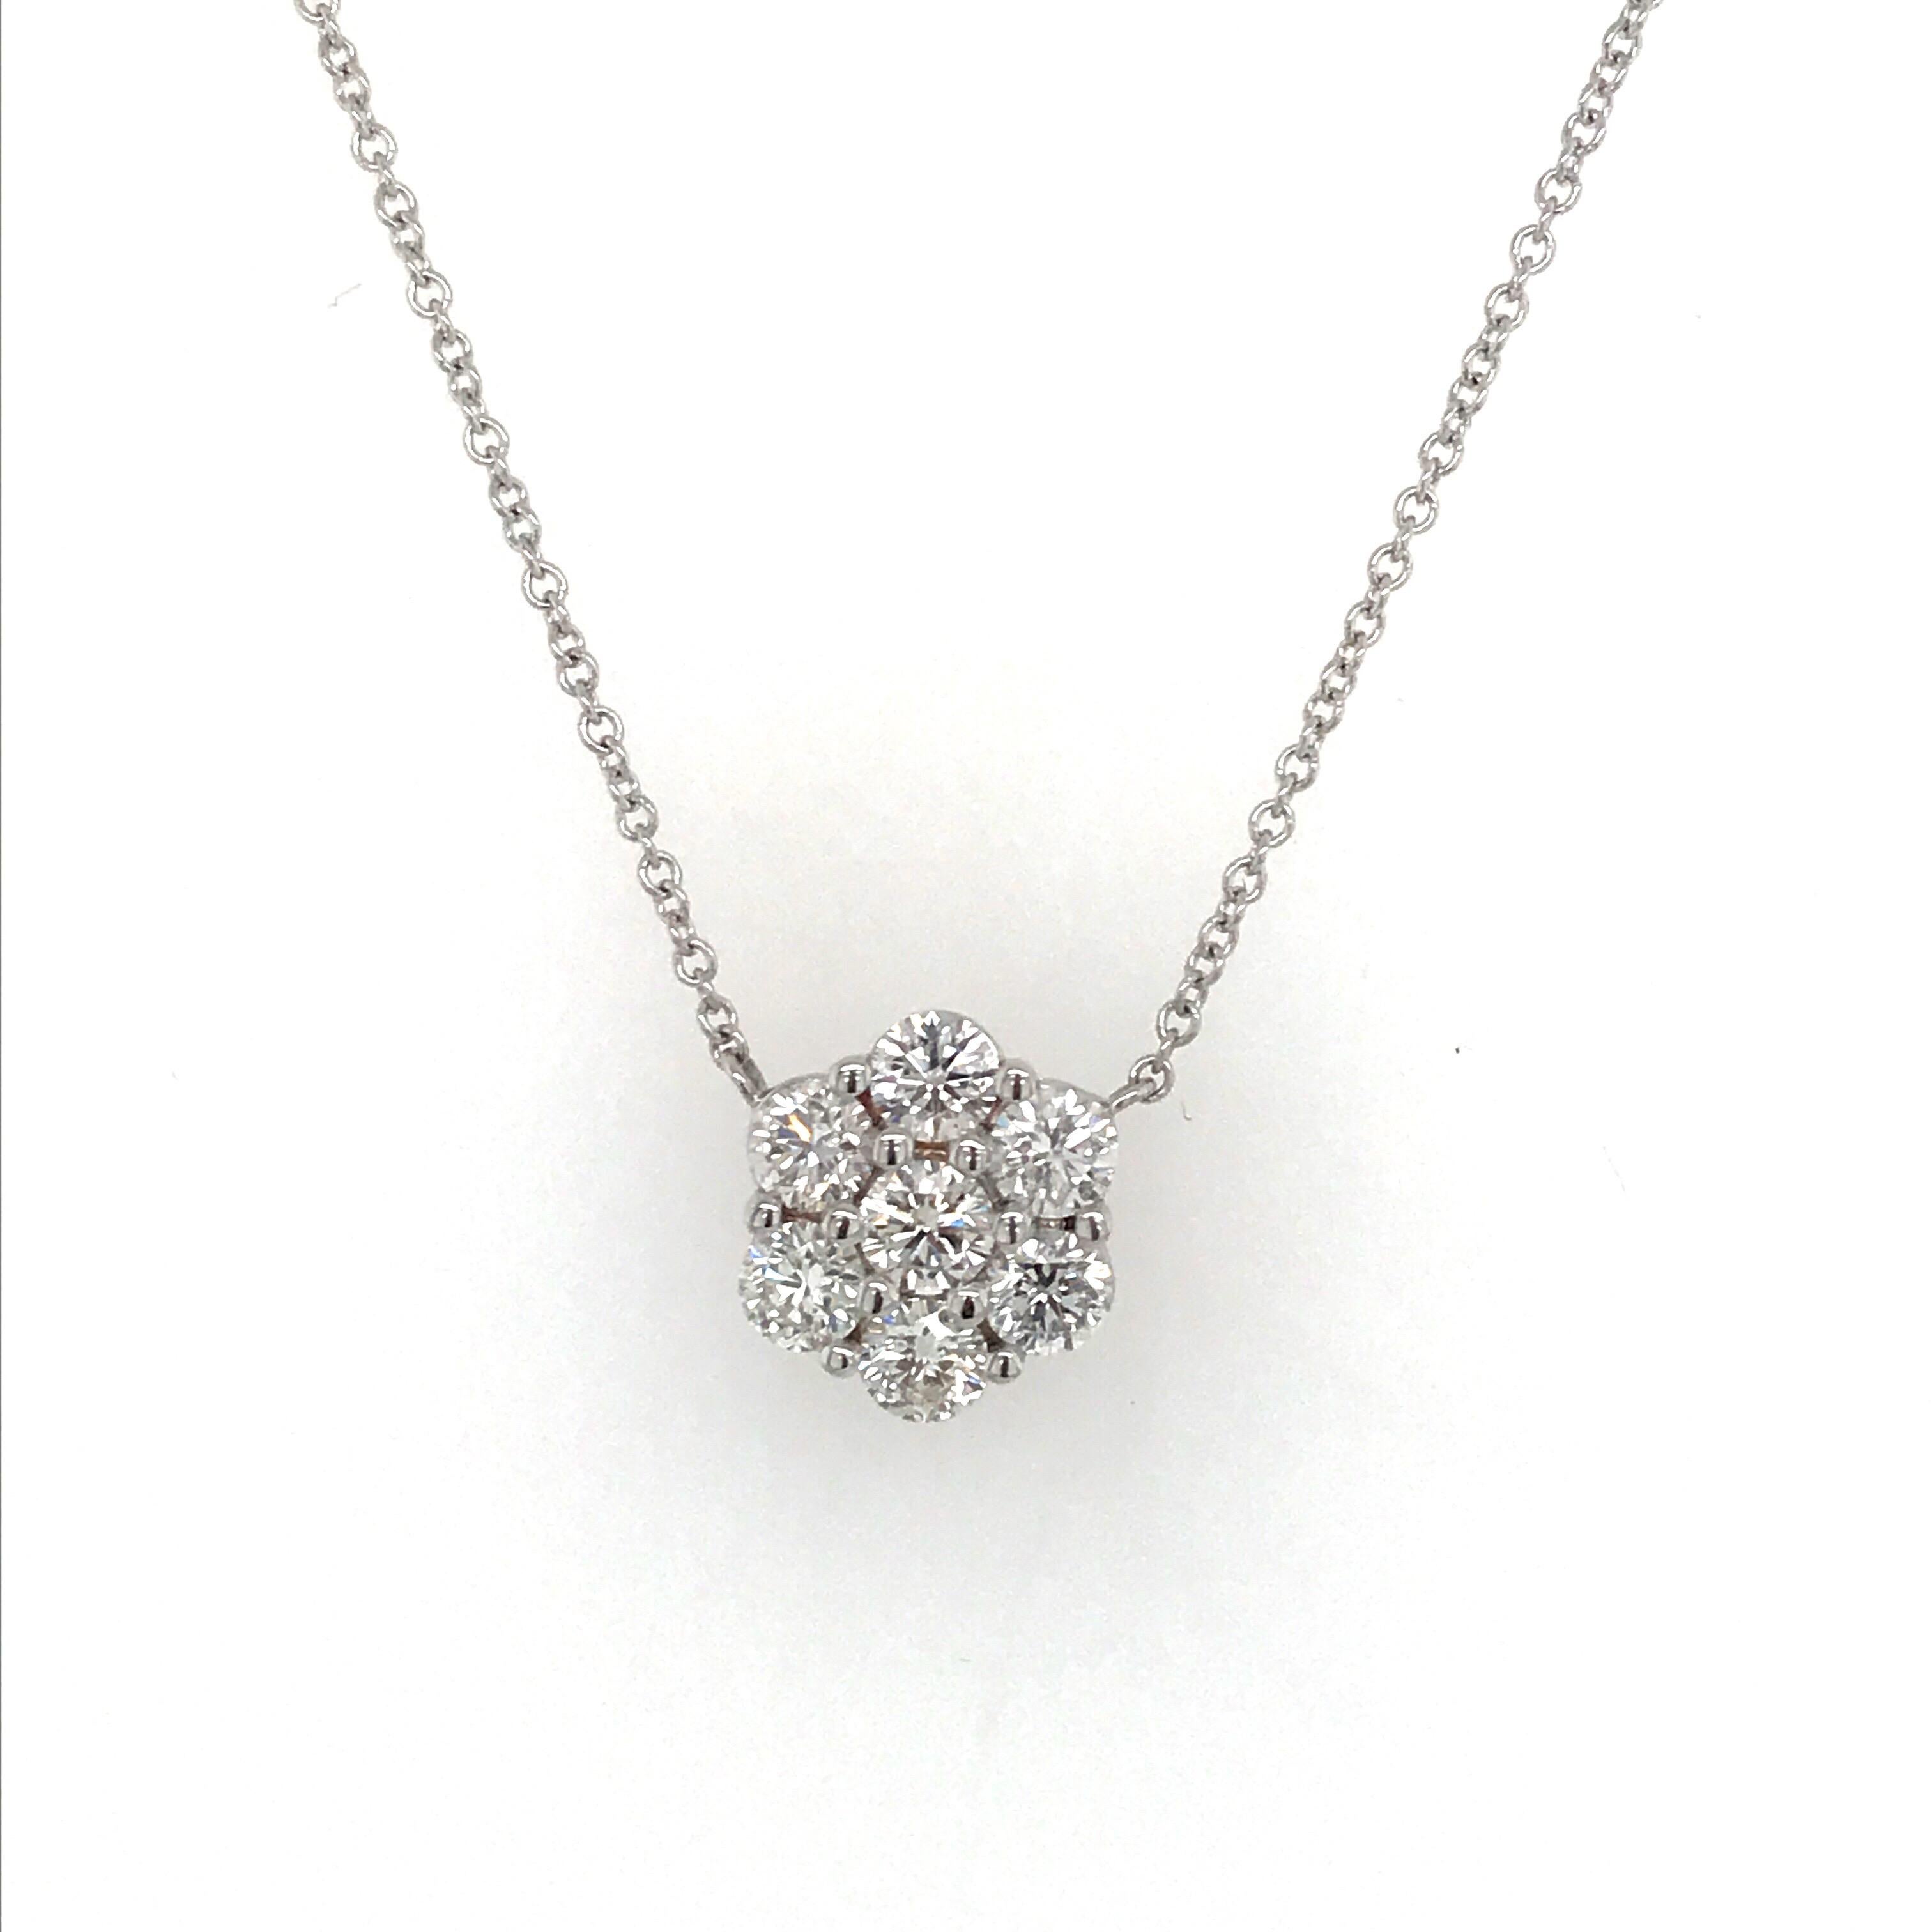 18K White Gold diamond cluster pendant featuring 7 round brilliants weighing 0.96 carats extended on a 16 inch chain. 
A timeless piece of jewelry. 
Also available in earrings. 
Color: H
Clarity VS2-SI1